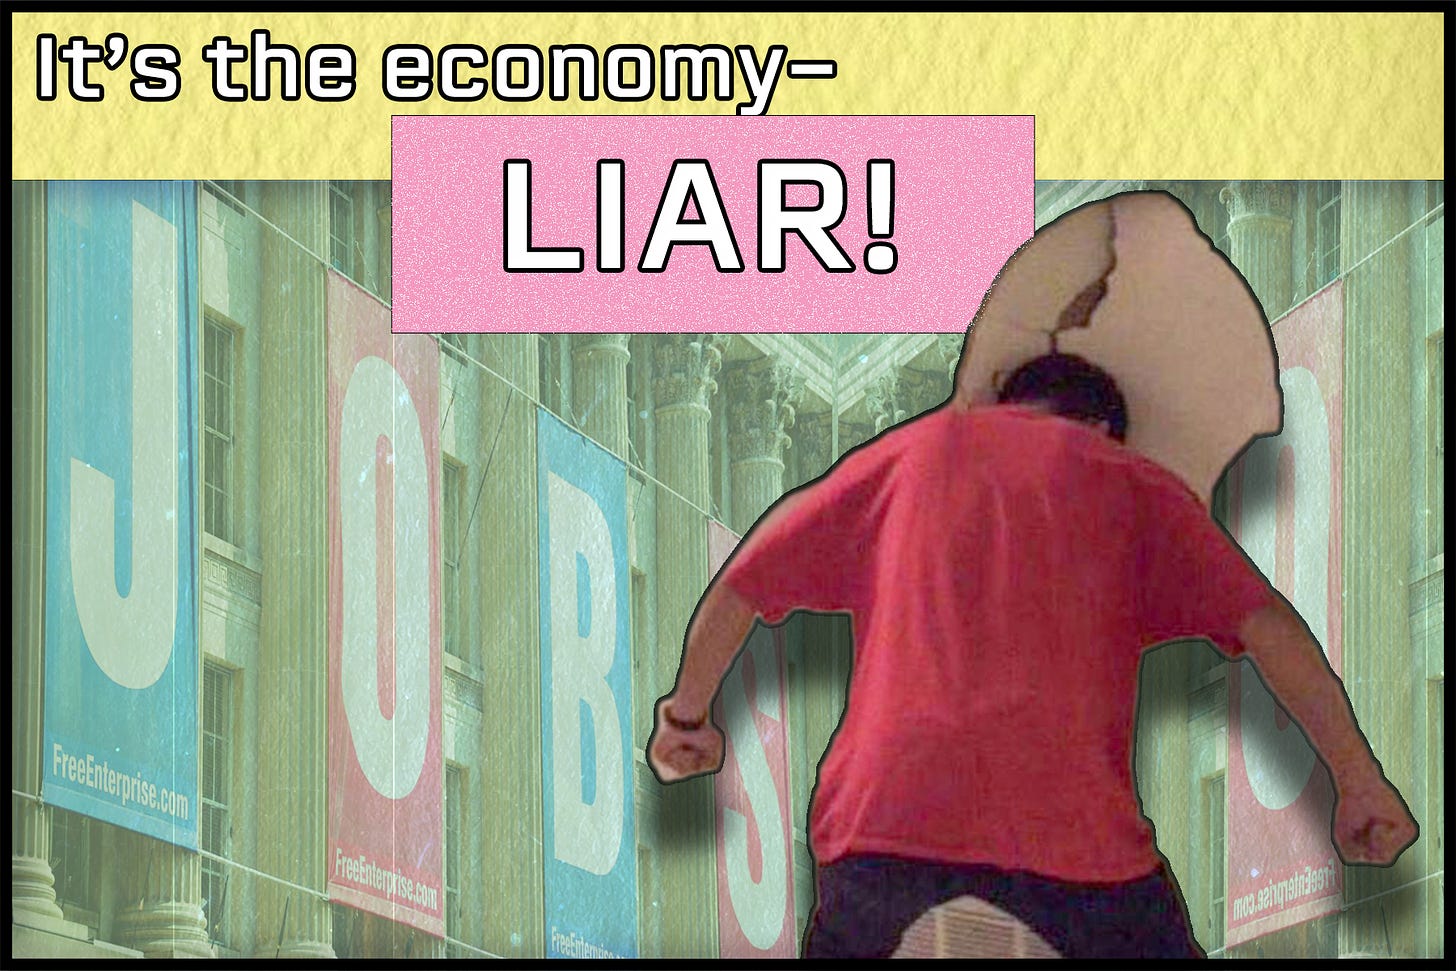 Meme topline reads 'It's the economy-'. Next line reads 'LIAR!' Photo of man hitting his head into wall